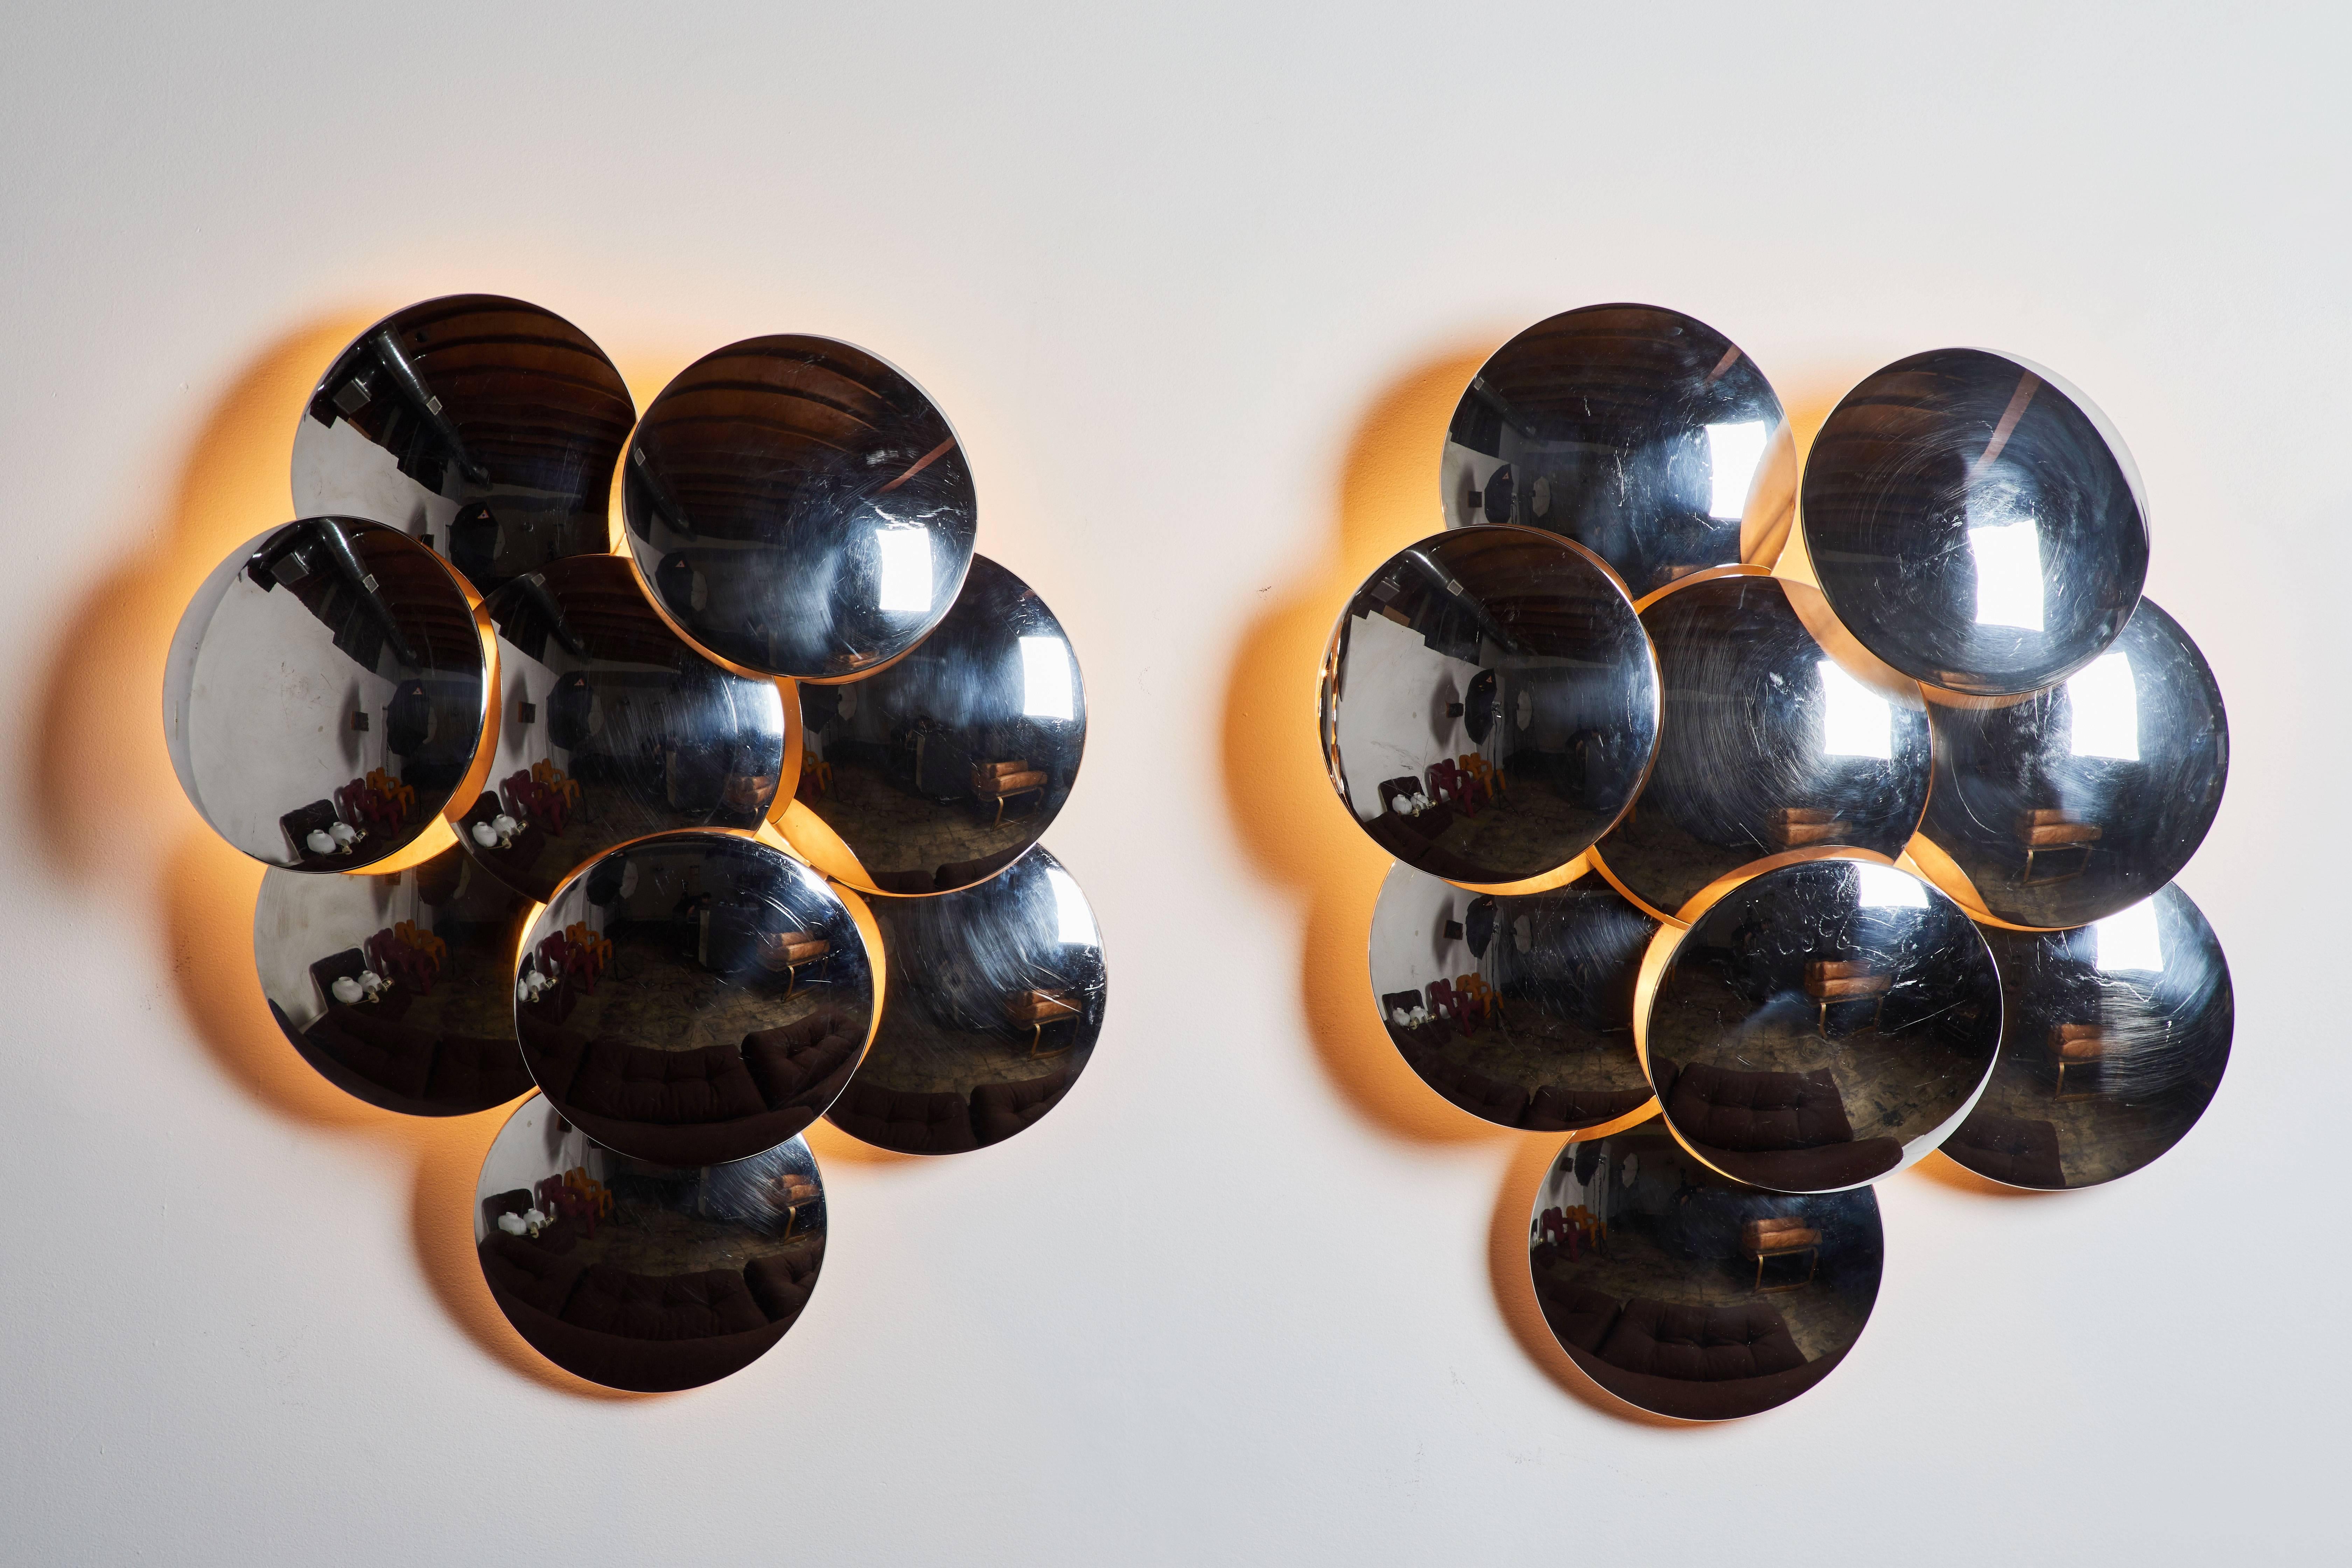 Pair of rare large sconces designed by Goffredo Reggiani. Manufactured in Italy, circa 1960s. Lacquered metal frame with nine chrome disks. Wired for US junction boxes. Retains original manufacturer's label. Each light takes one E27 100w maximum